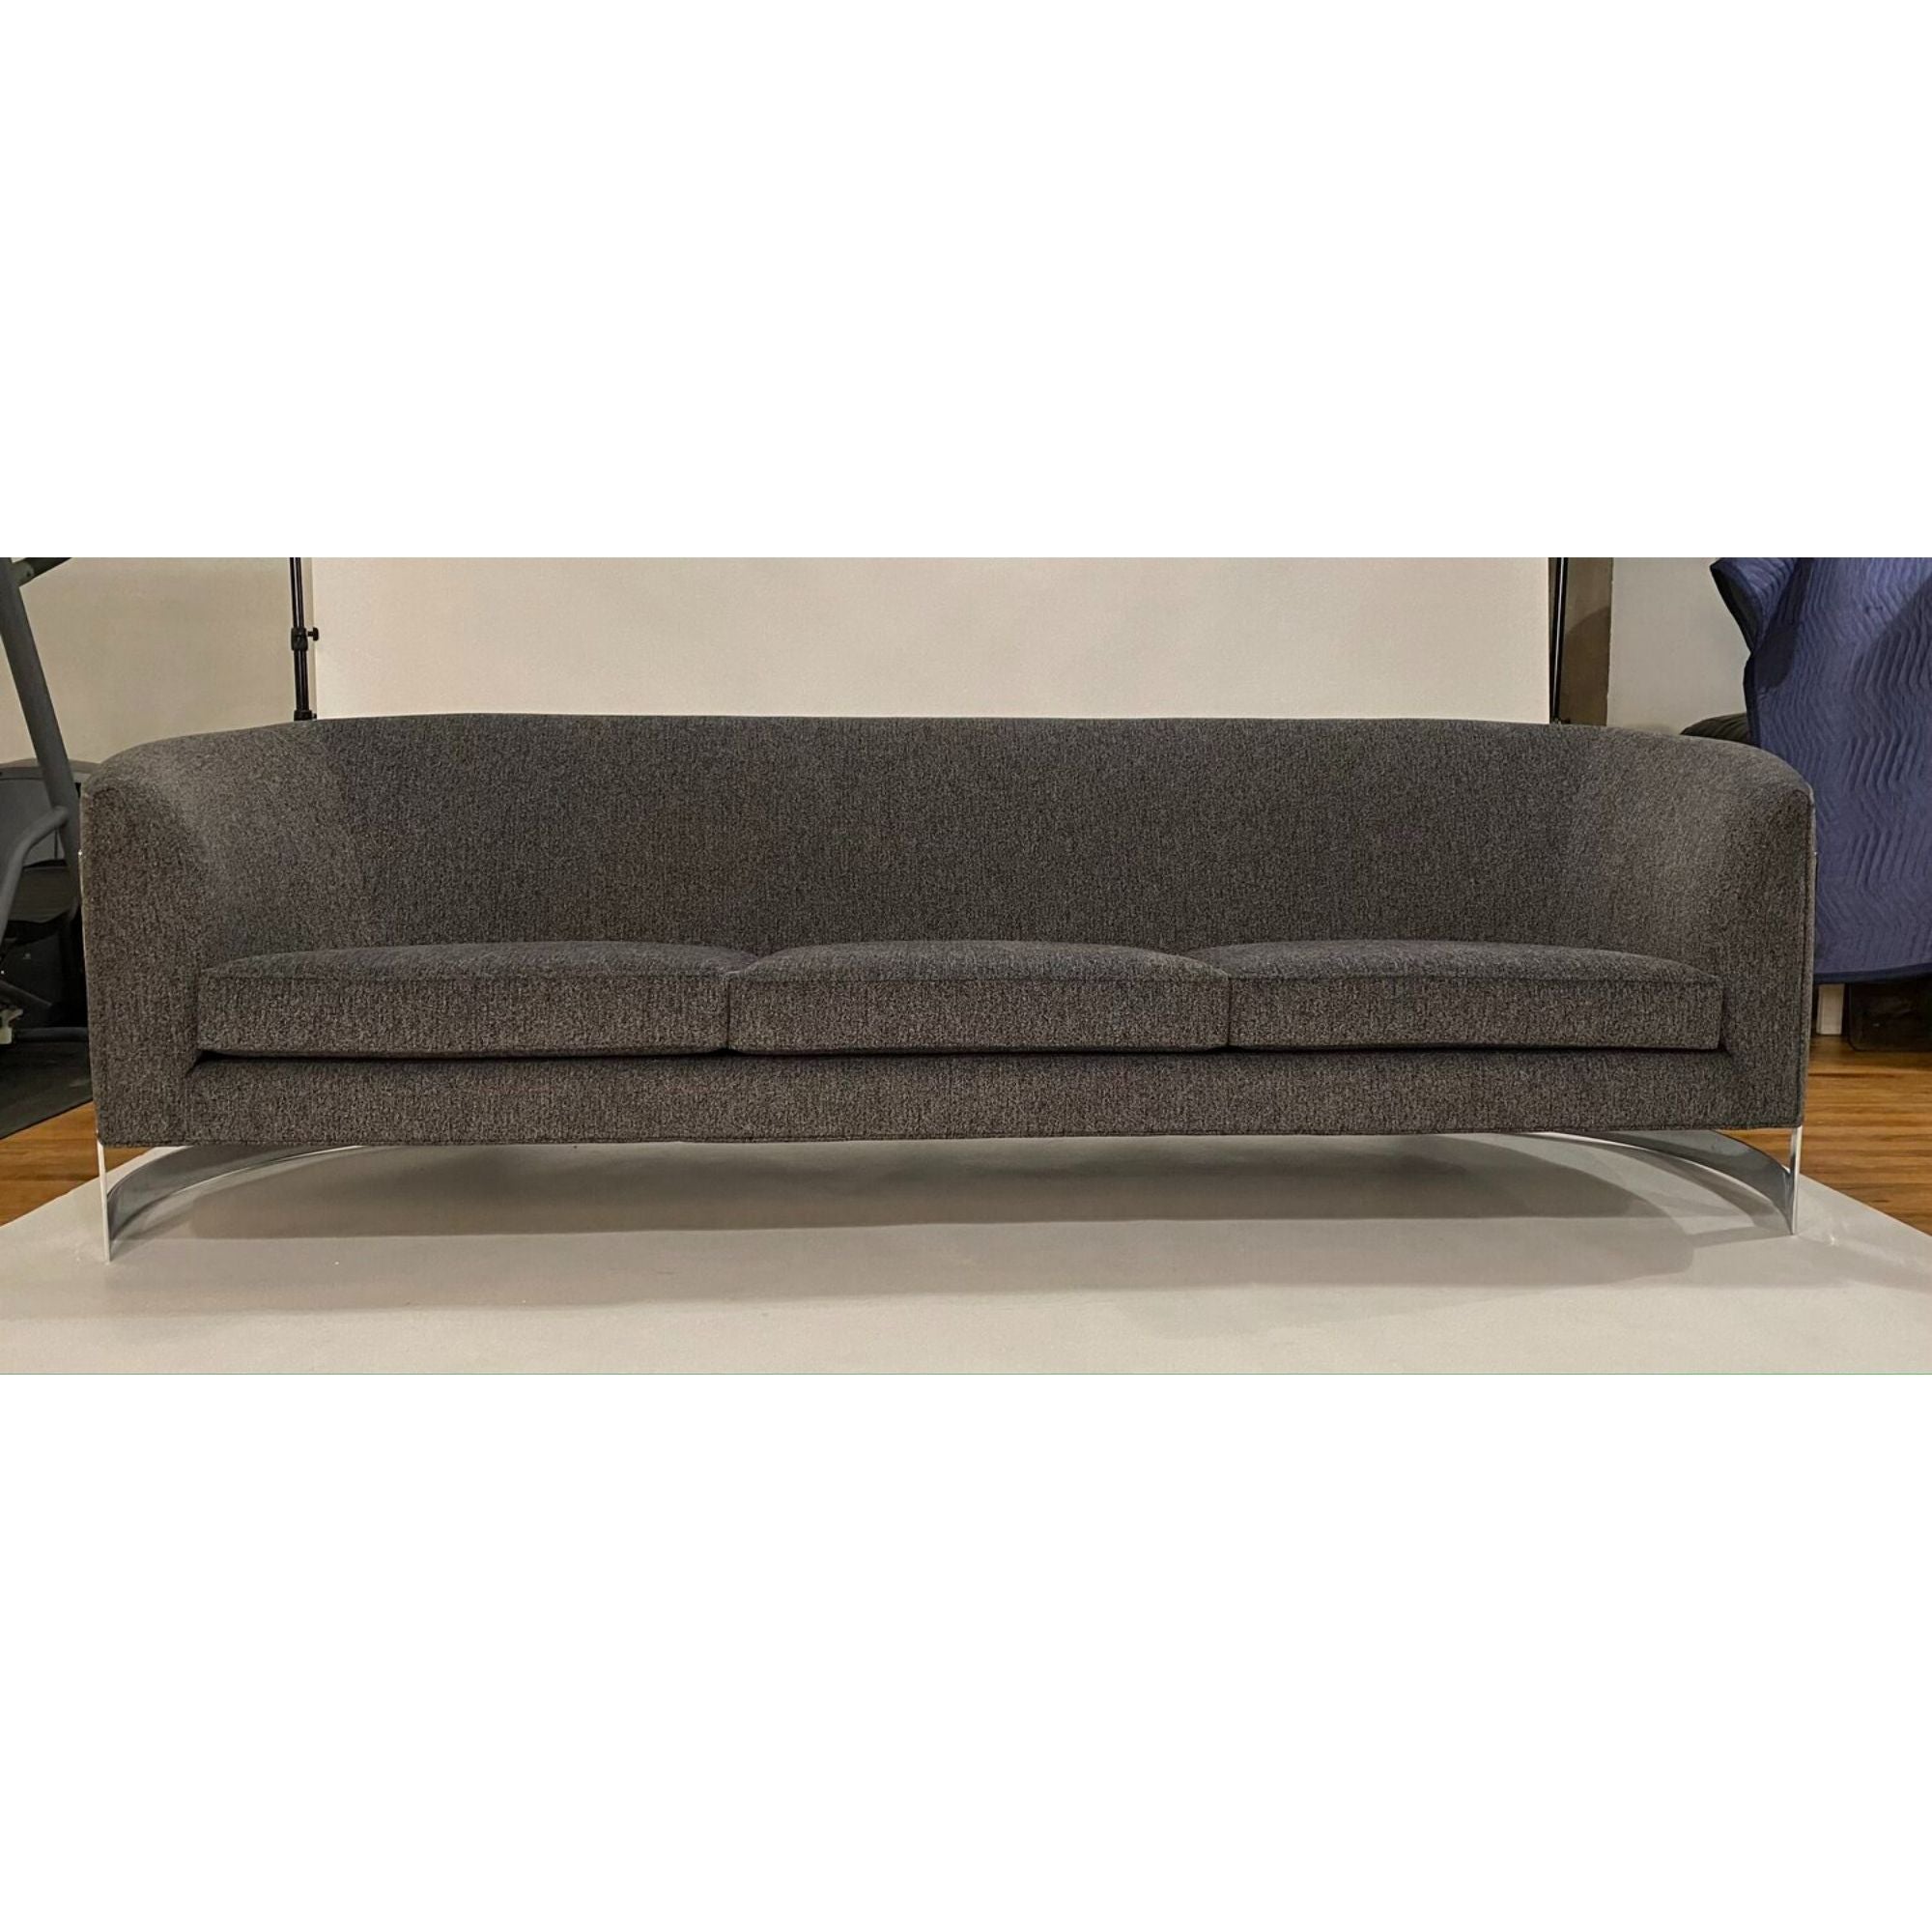 Mid-Century Modern floating sofa with curved ends on a chrome frame. 
This sofa is all newly upholstered in a black and white/gray tweed fabric with all new cushions. 
Sofa has the illusion of floating in air and looks fantastic from every angle,